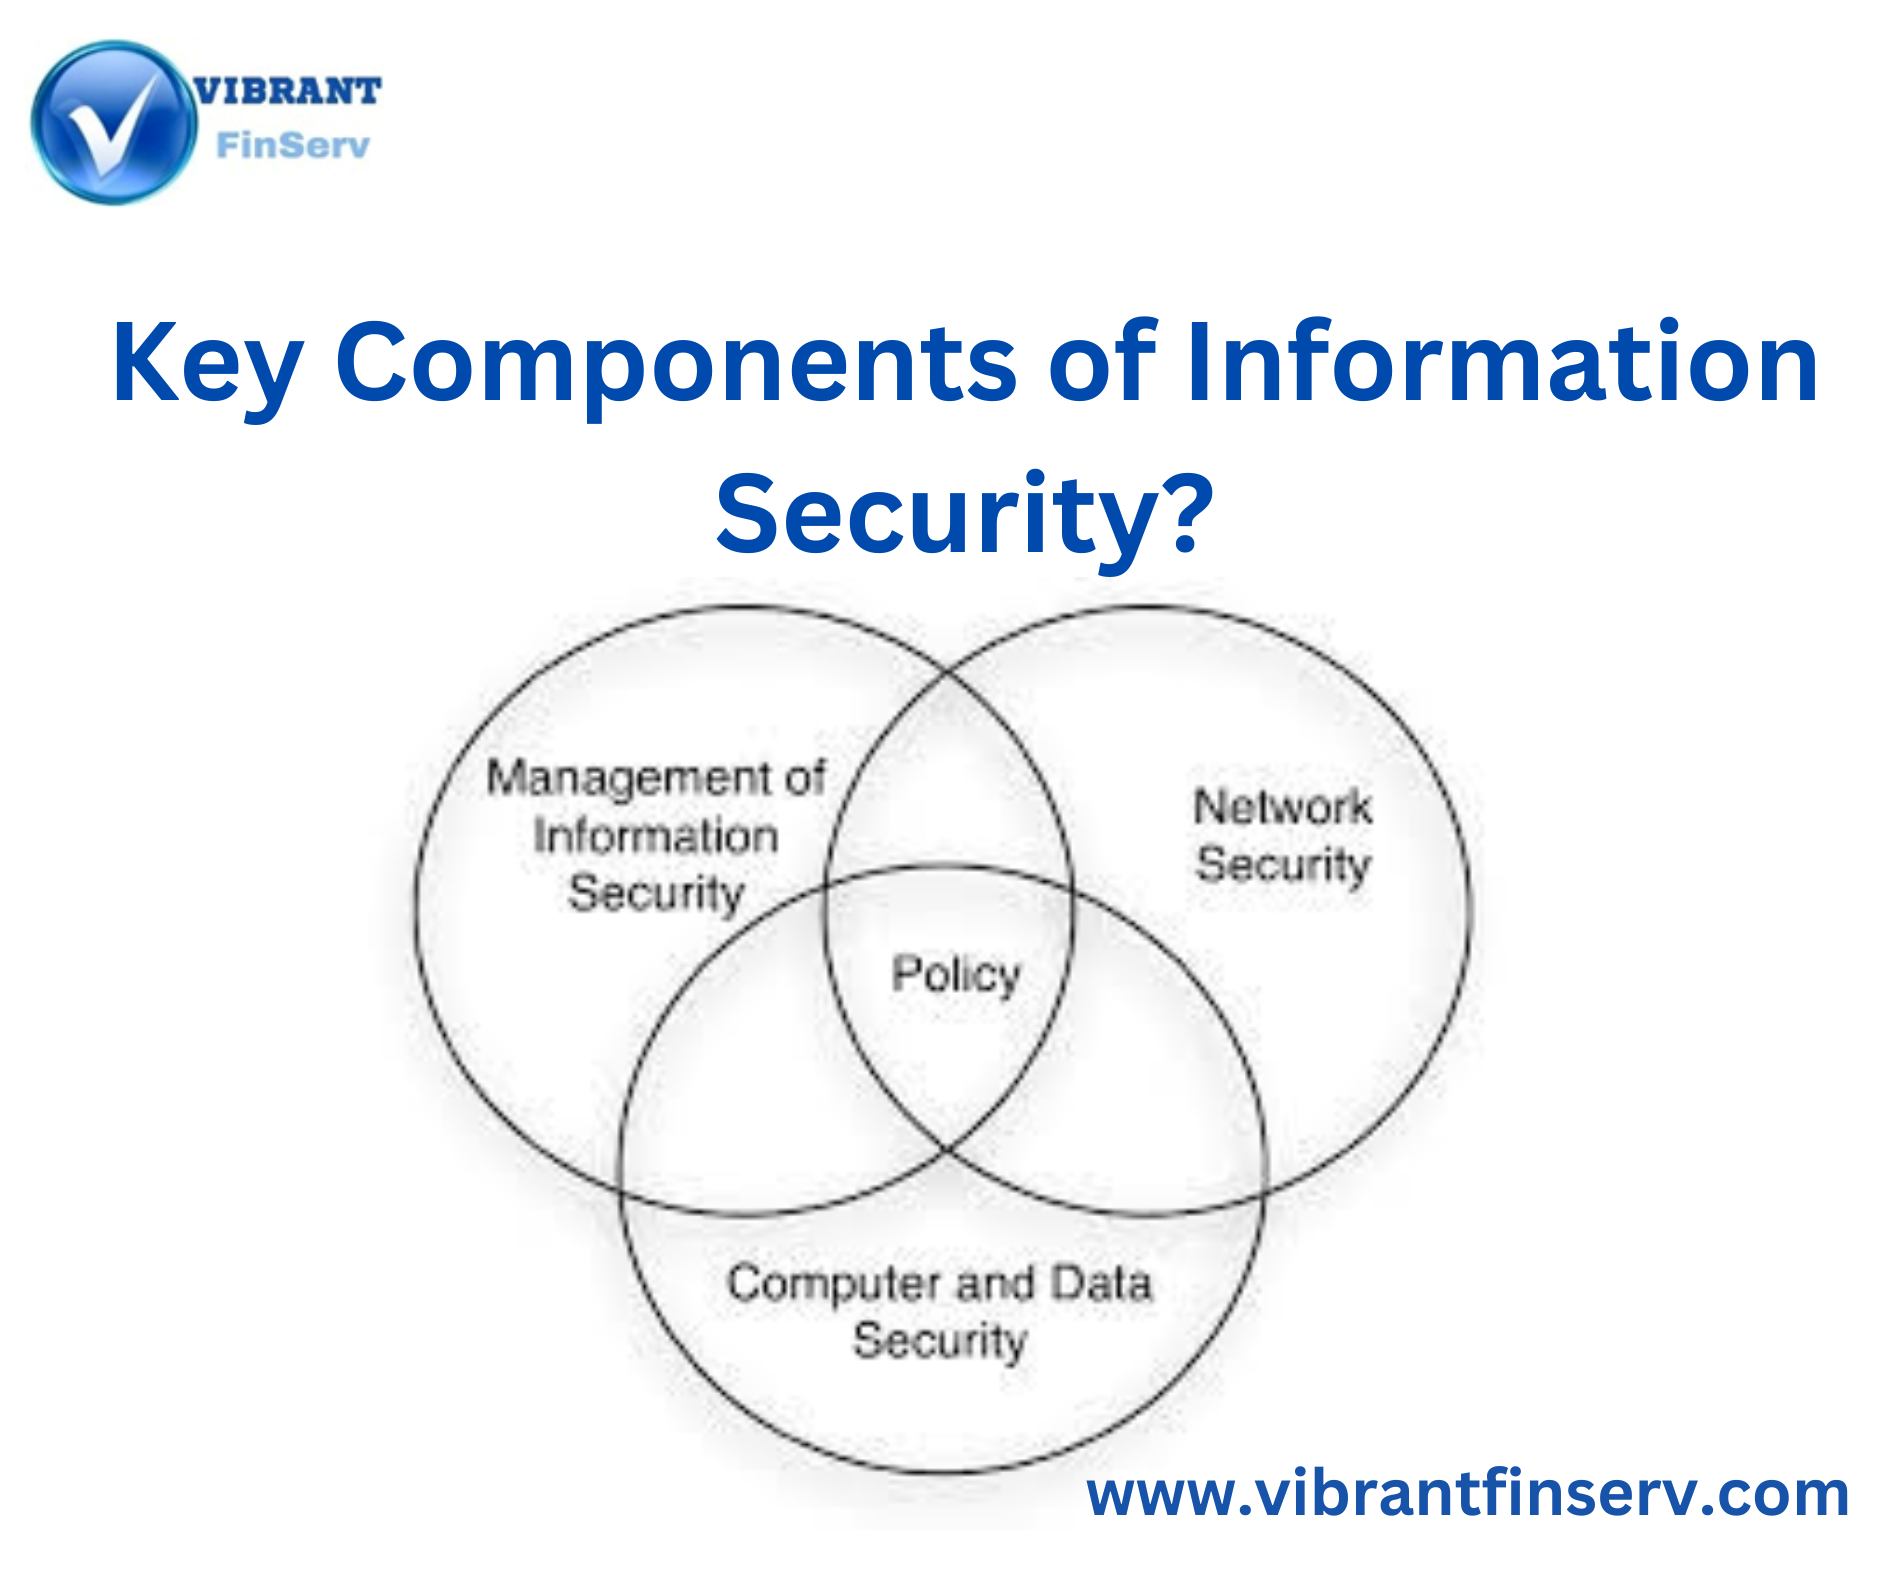 Key Components of Information Security